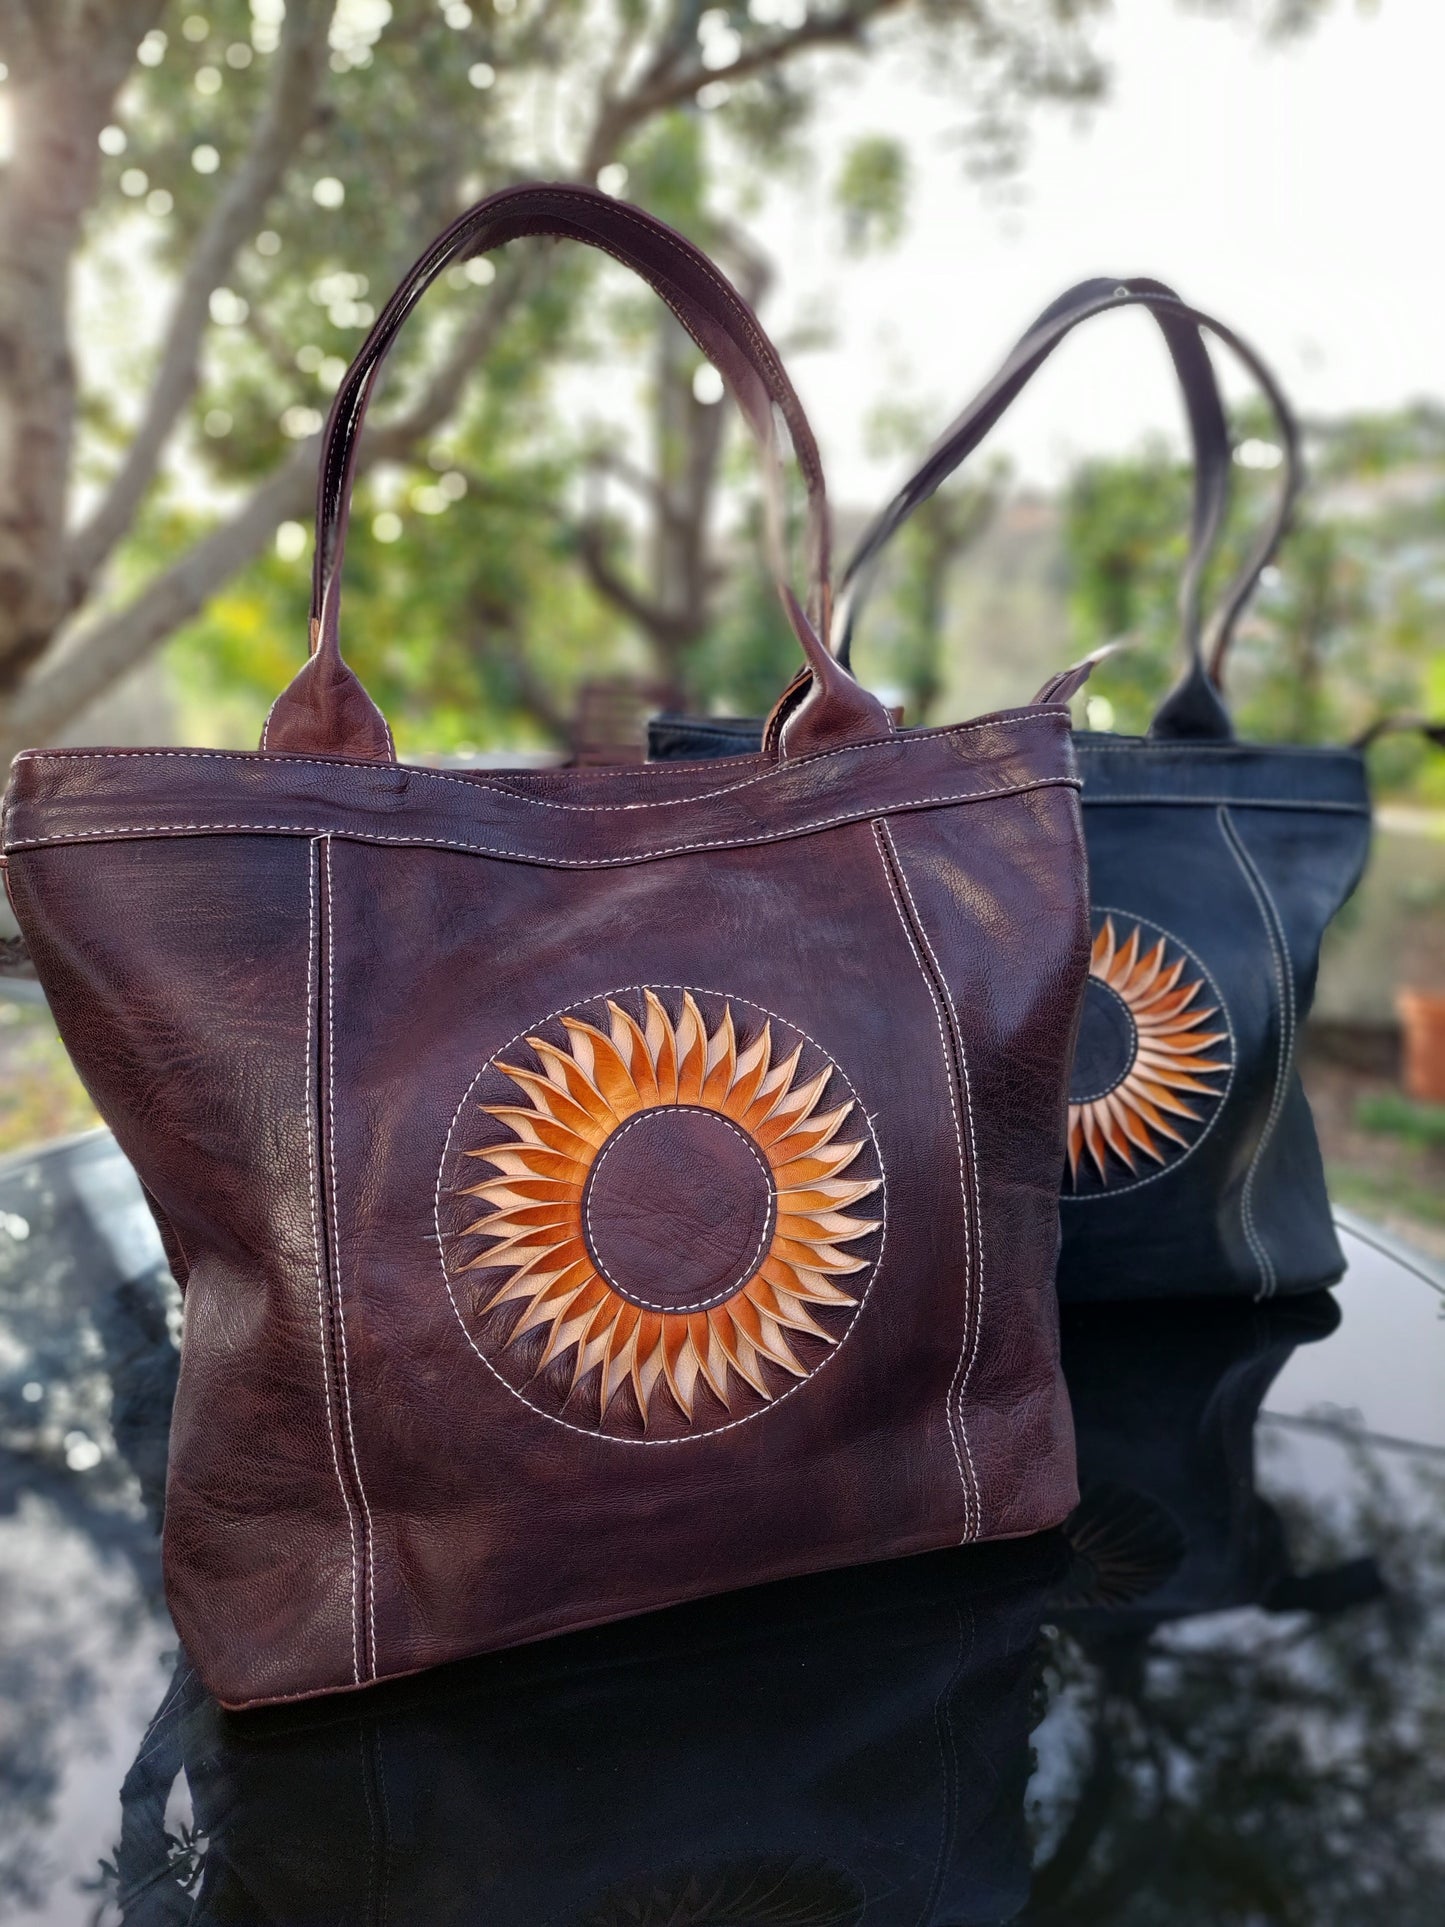 Brown | black All leather tote | Camel Leather | traditional Moroccan leather tote| laser cut out sunflower design | top zip closure